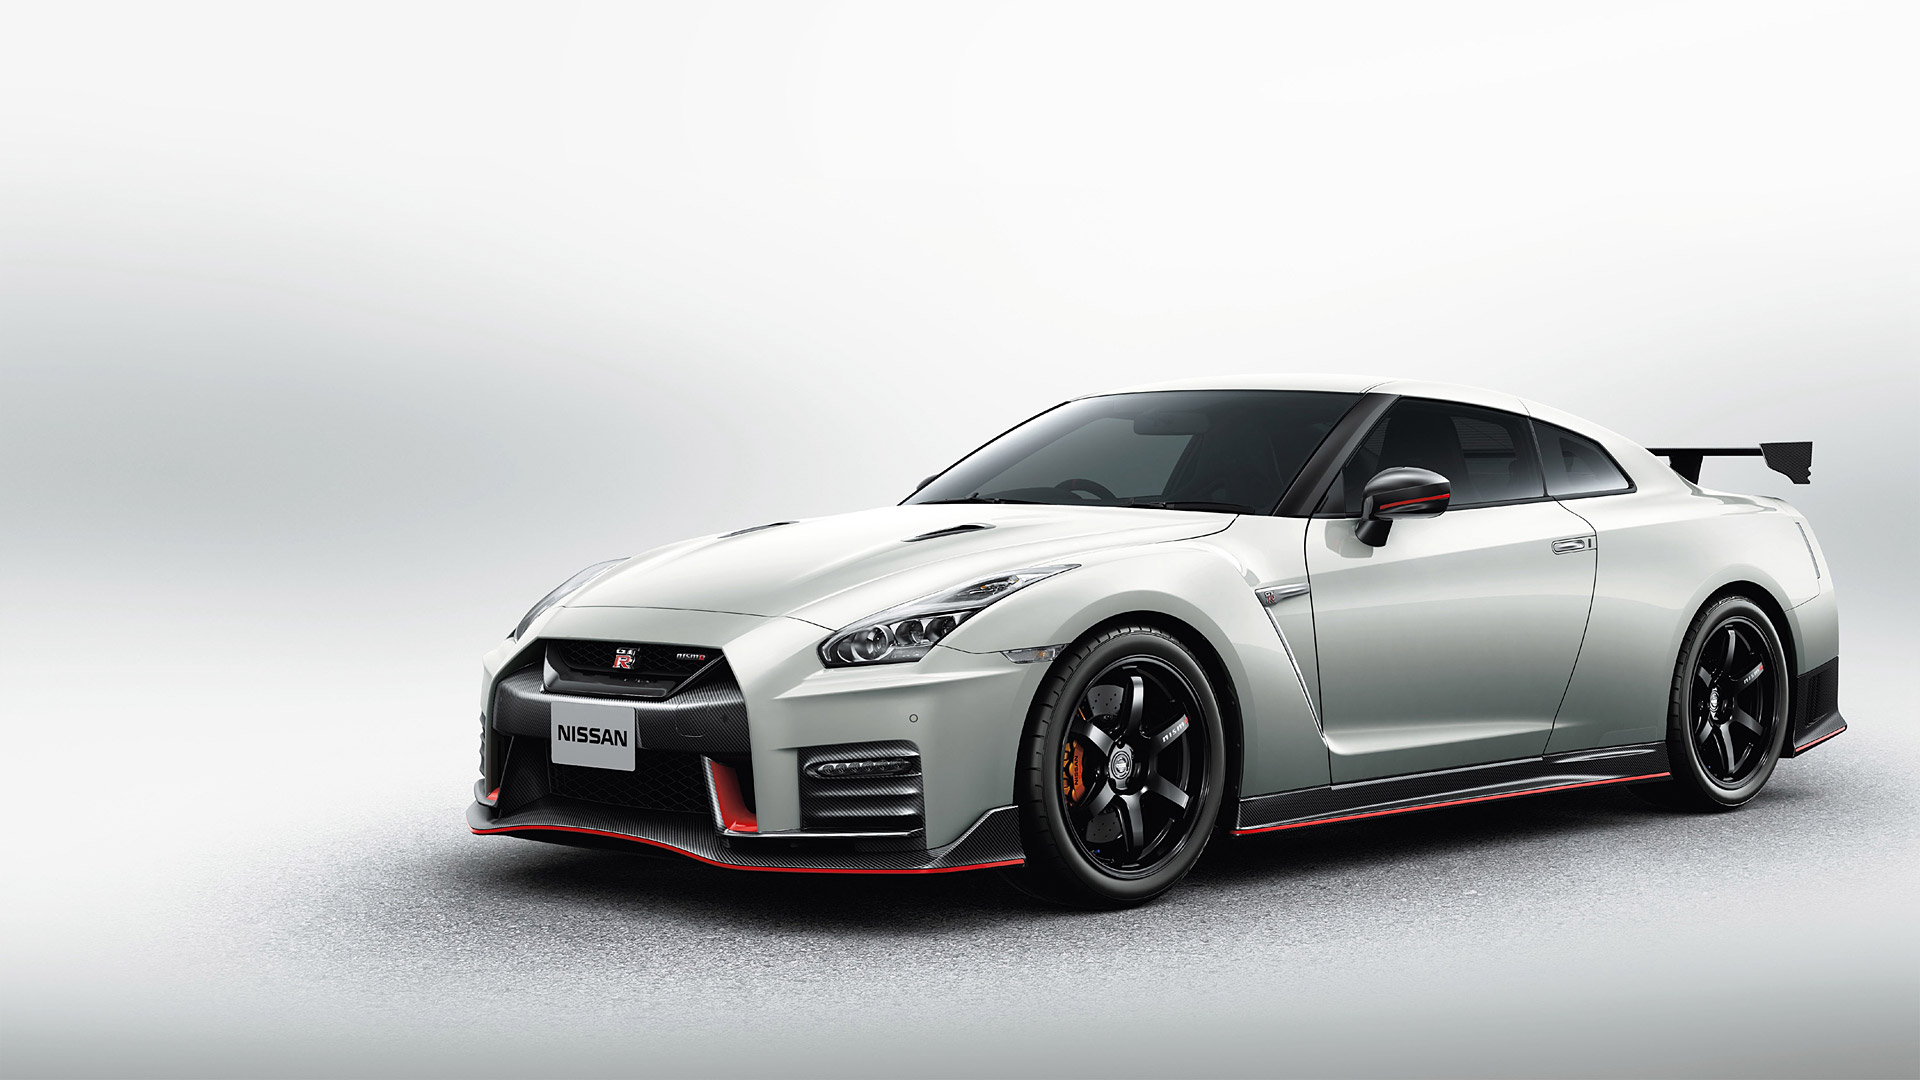 Nissan Gt R Nismo Wallpaper HD Image Wsupercars